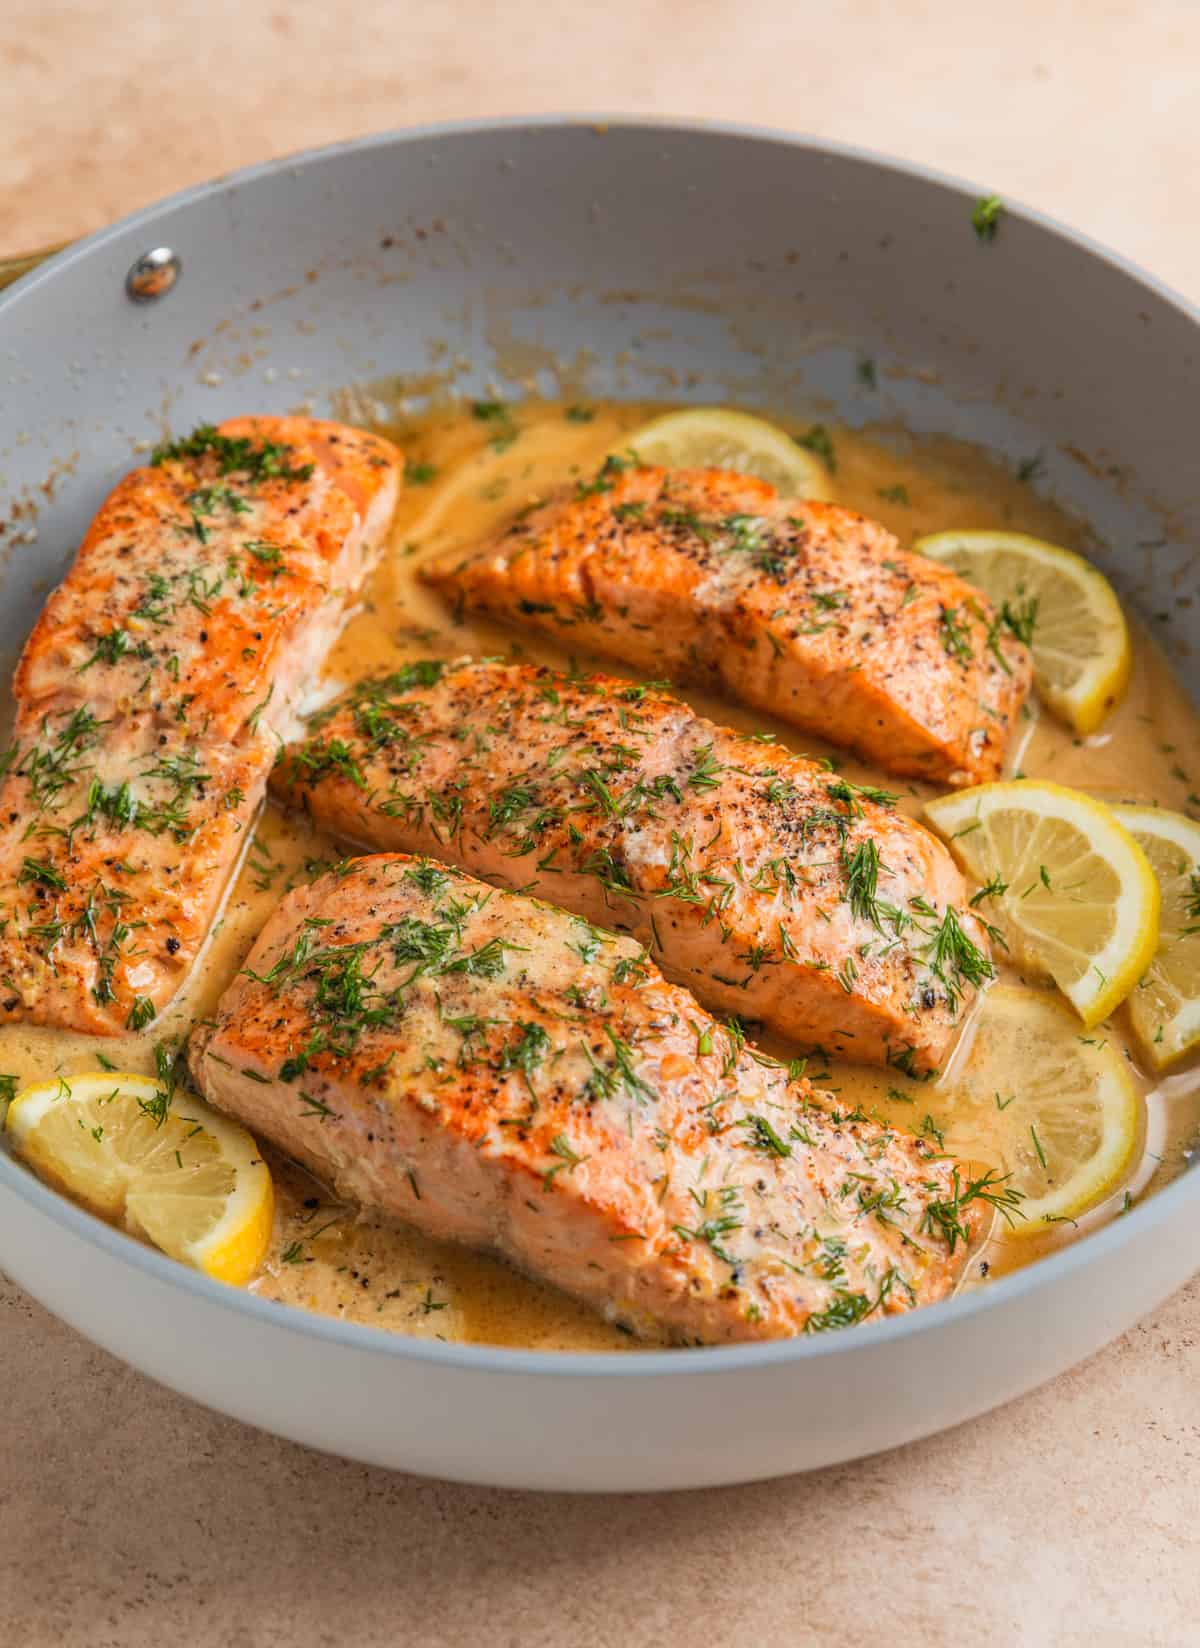 Cooked lemon dill salmon in pan with lemon slices and butter sauce.